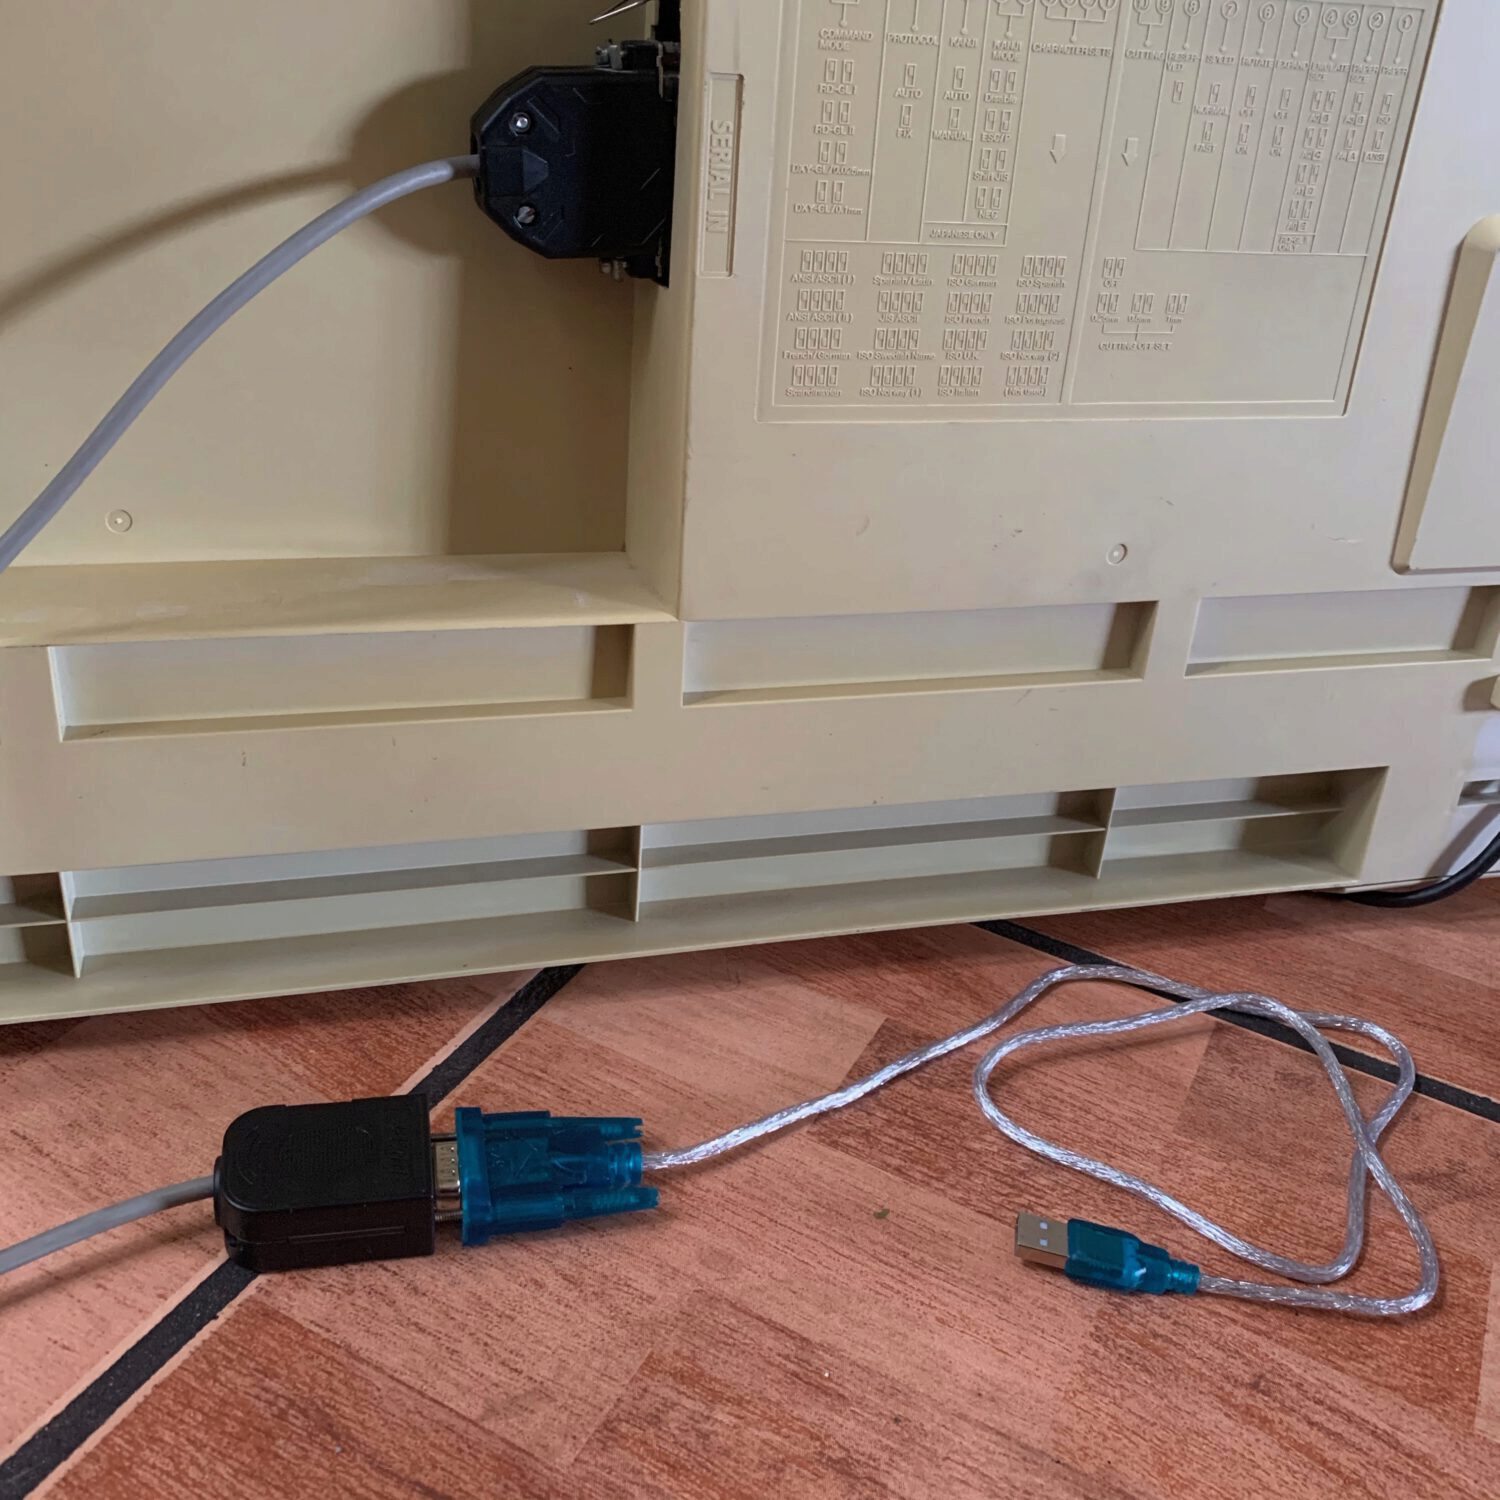 How the connection between the DB25 to DB9 adapter and the USB to serial adapter looked like